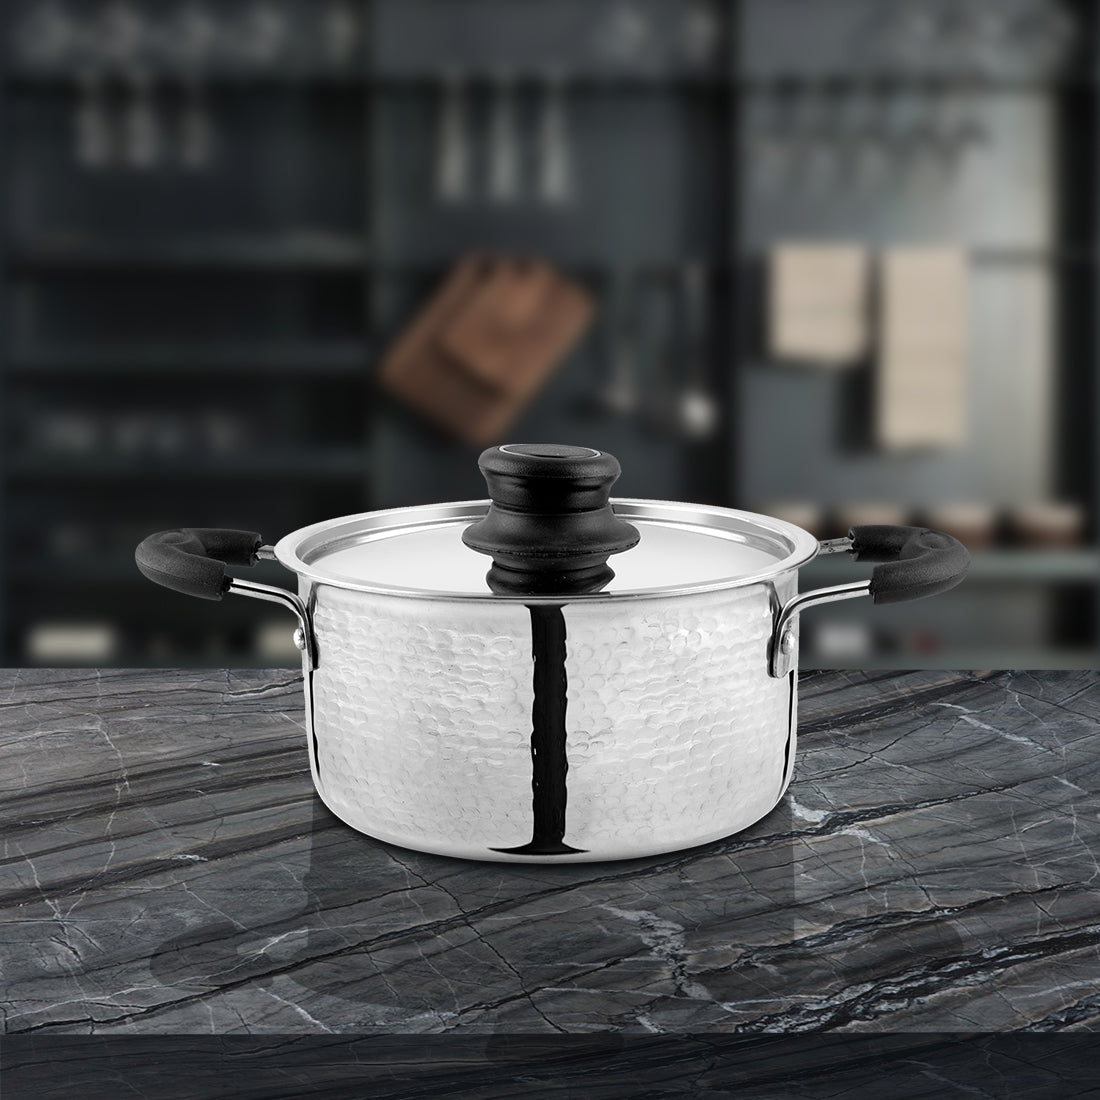 Stainless Steel Light Weight Hammered Casserole with SS Lid